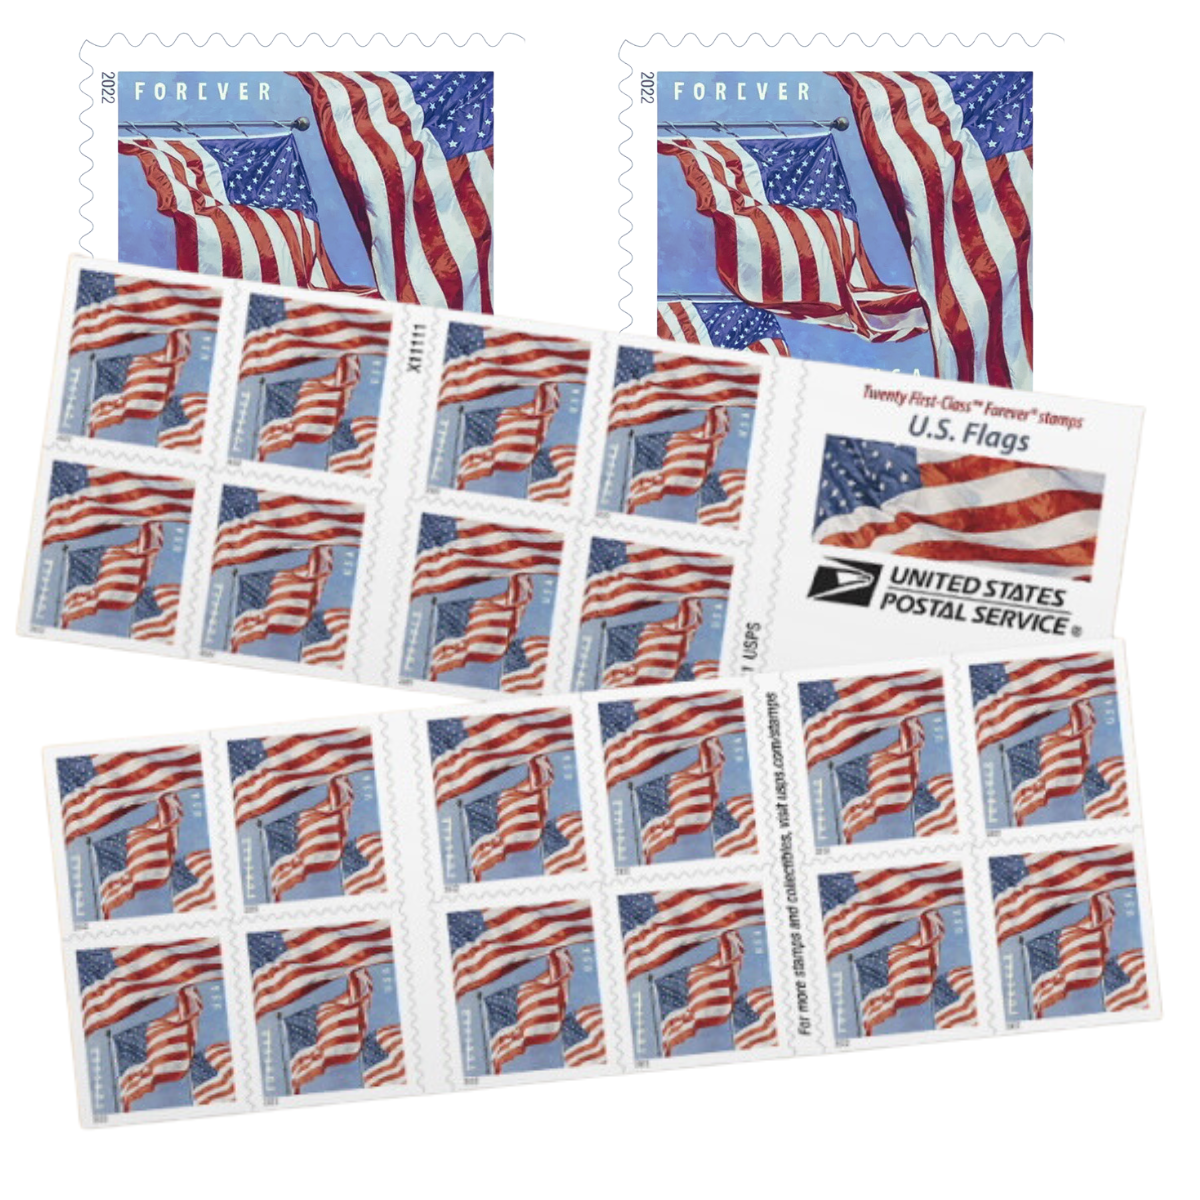 2022 Roll Stamps the Perfect Addition to Any Collection or a